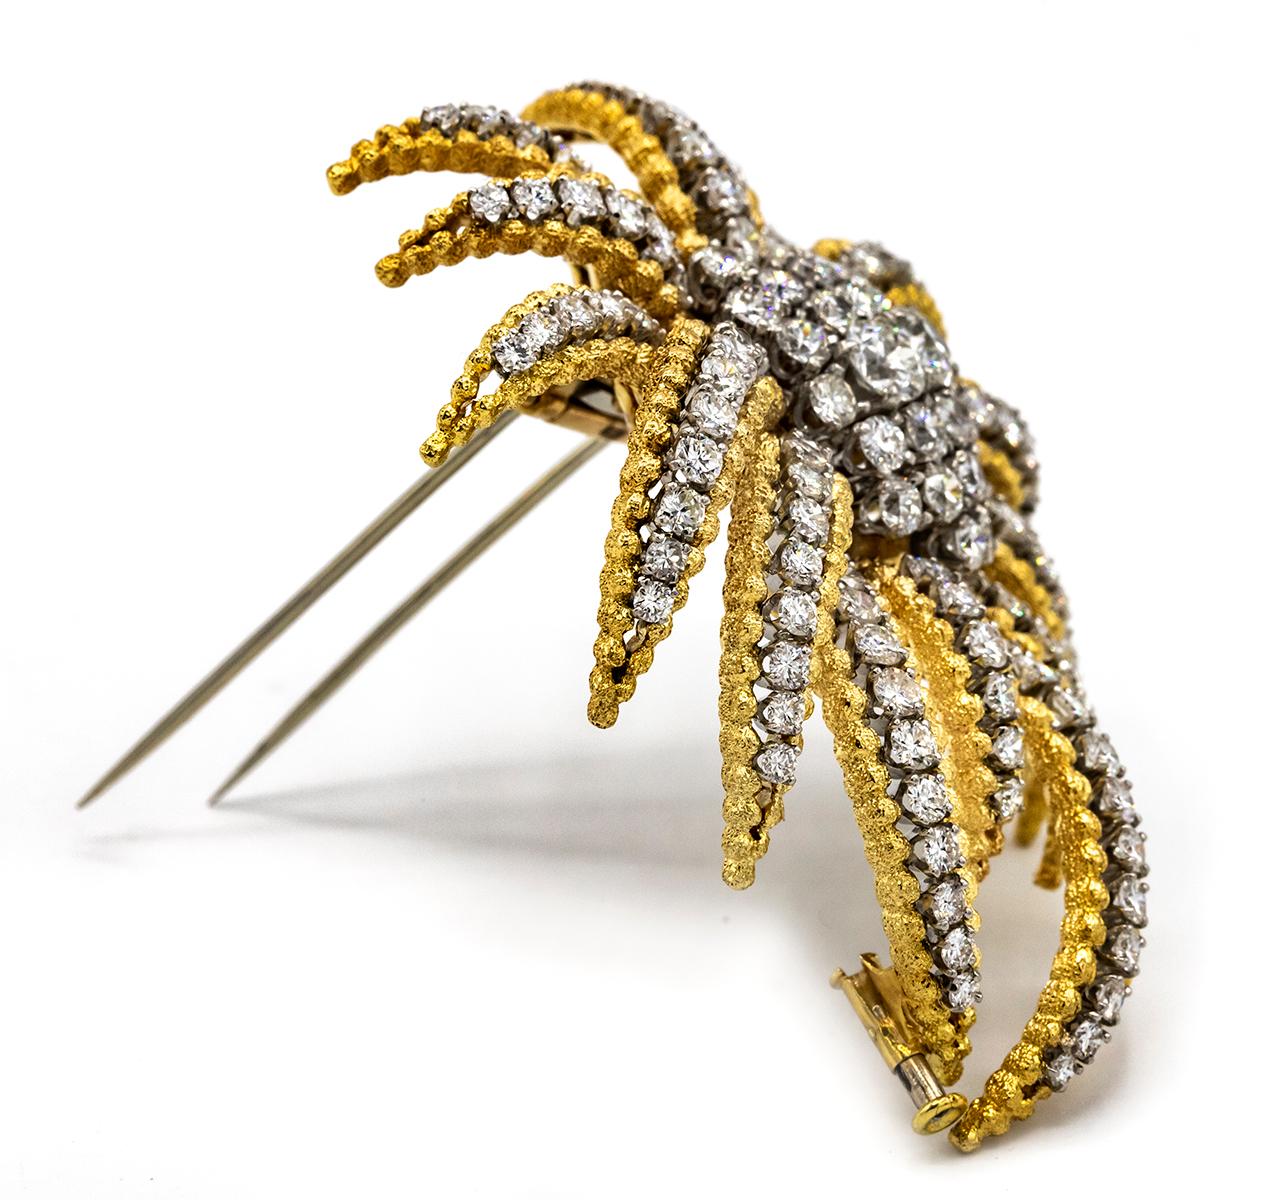 Rope design vintage 1970's David Webb spray brooch 18K yellow gold and diamonds. David Webb jewelry design work was realized with technical mastery and who was viewed as a high-society figure whose clientele included Jacqueline Kennedy, Doris Duke,